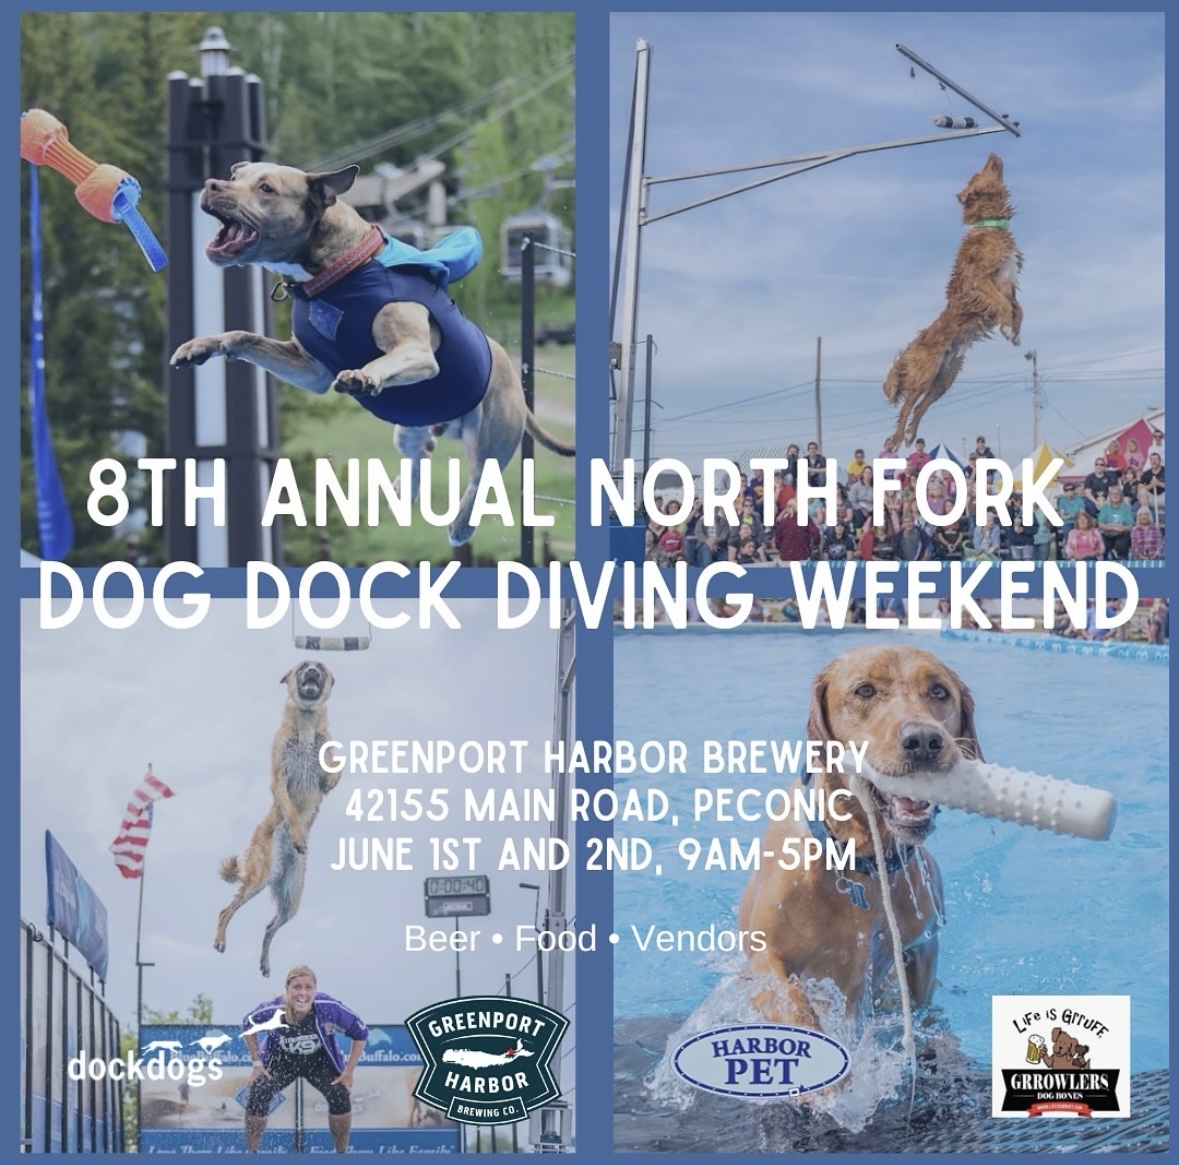 See dogs fly this weekend at #greenportbrewing for the 8th Annual North Fork Dog Dock Diving! 🐾🌊 #discoverlongisland On June 1st & 2nd from 9am-5pm, dogs of all kinds will compete in 'The Long Jump', 'The High Jump' and 'Speed Retrieve' by running from a dock into water. 🐶💦